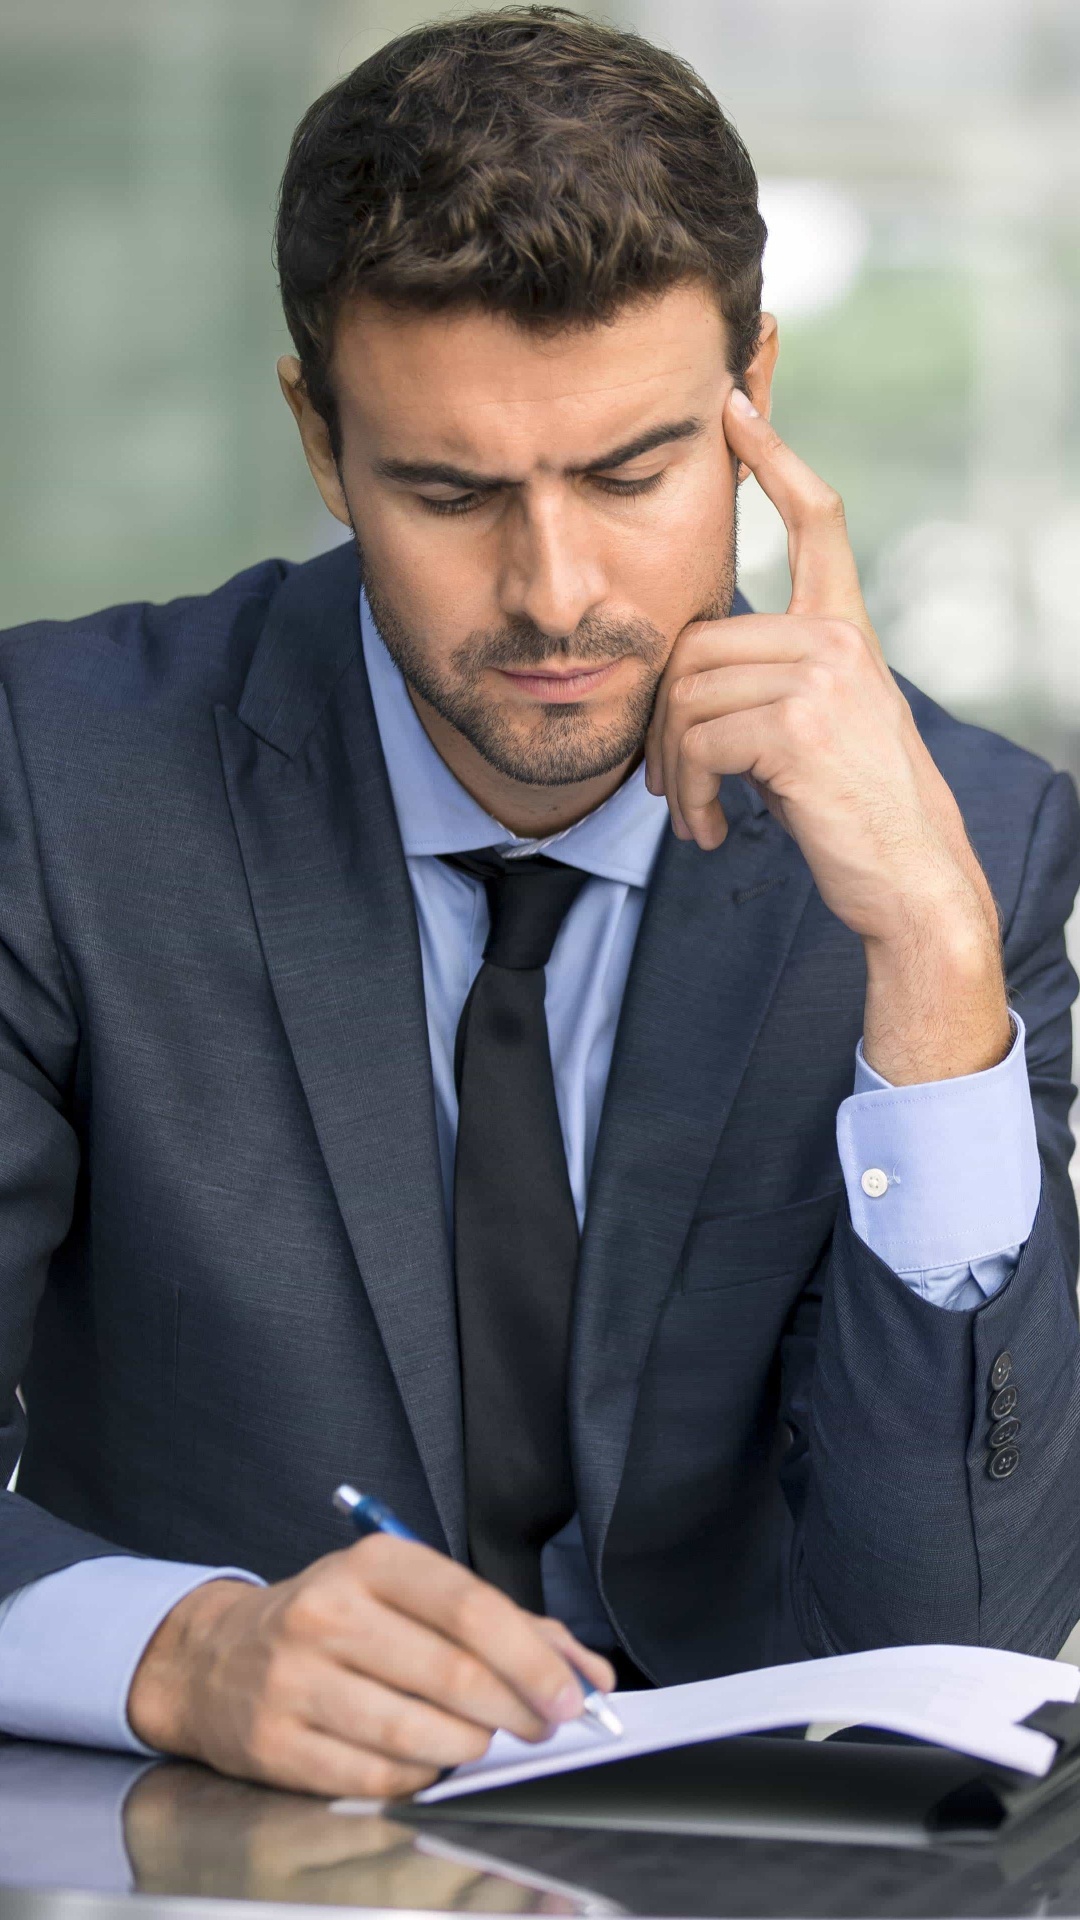 Businessman Thinking, Businessperson, Thought, Job, Business. Wallpaper in 1080x1920 Resolution